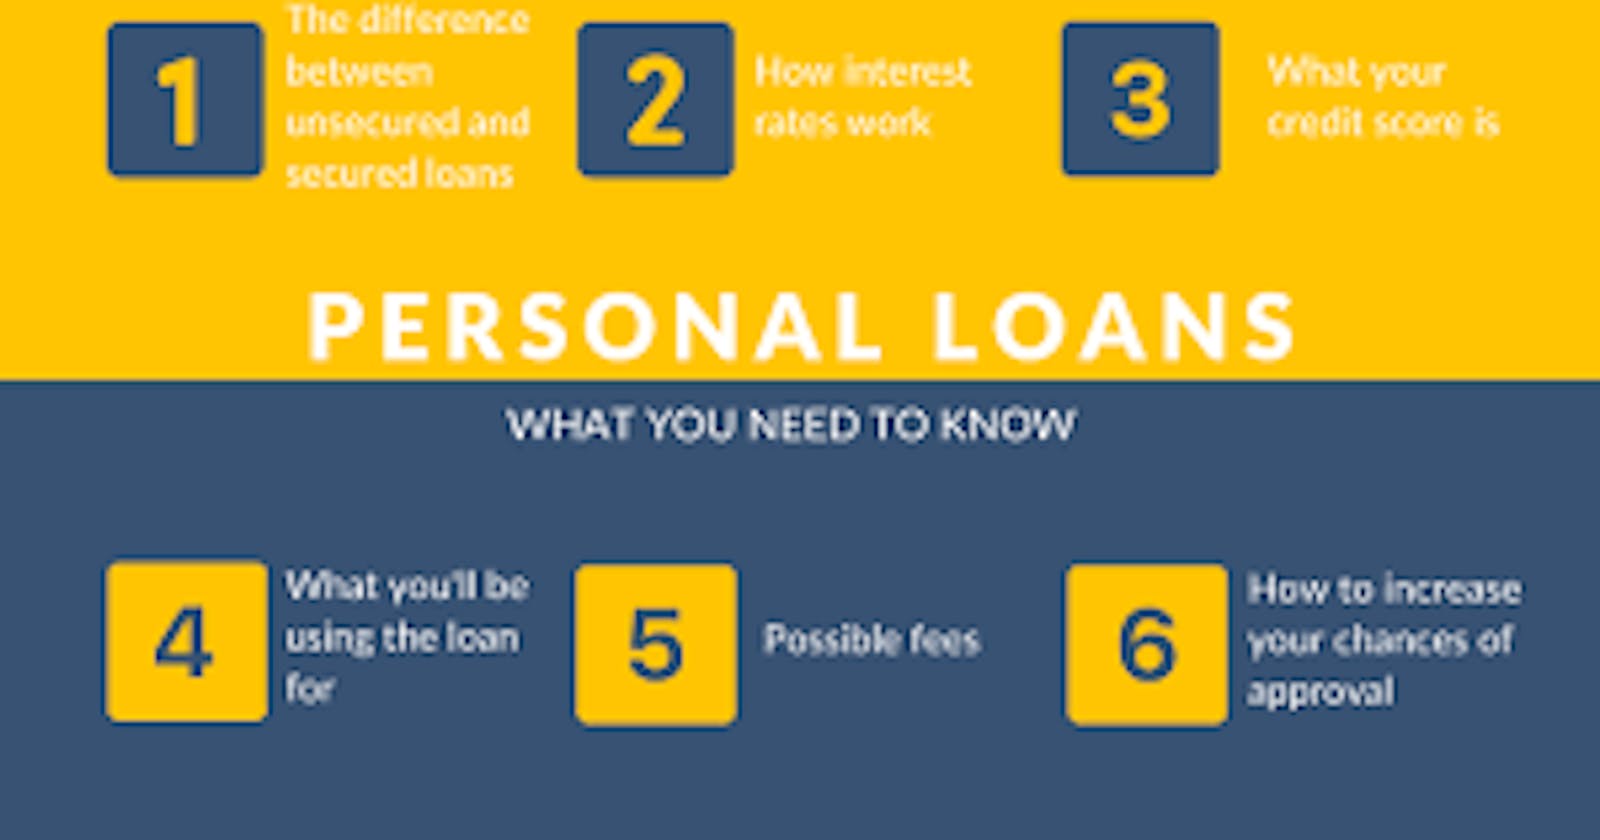 Personal Loans 101: Everything You Need to Know Before Borrowing